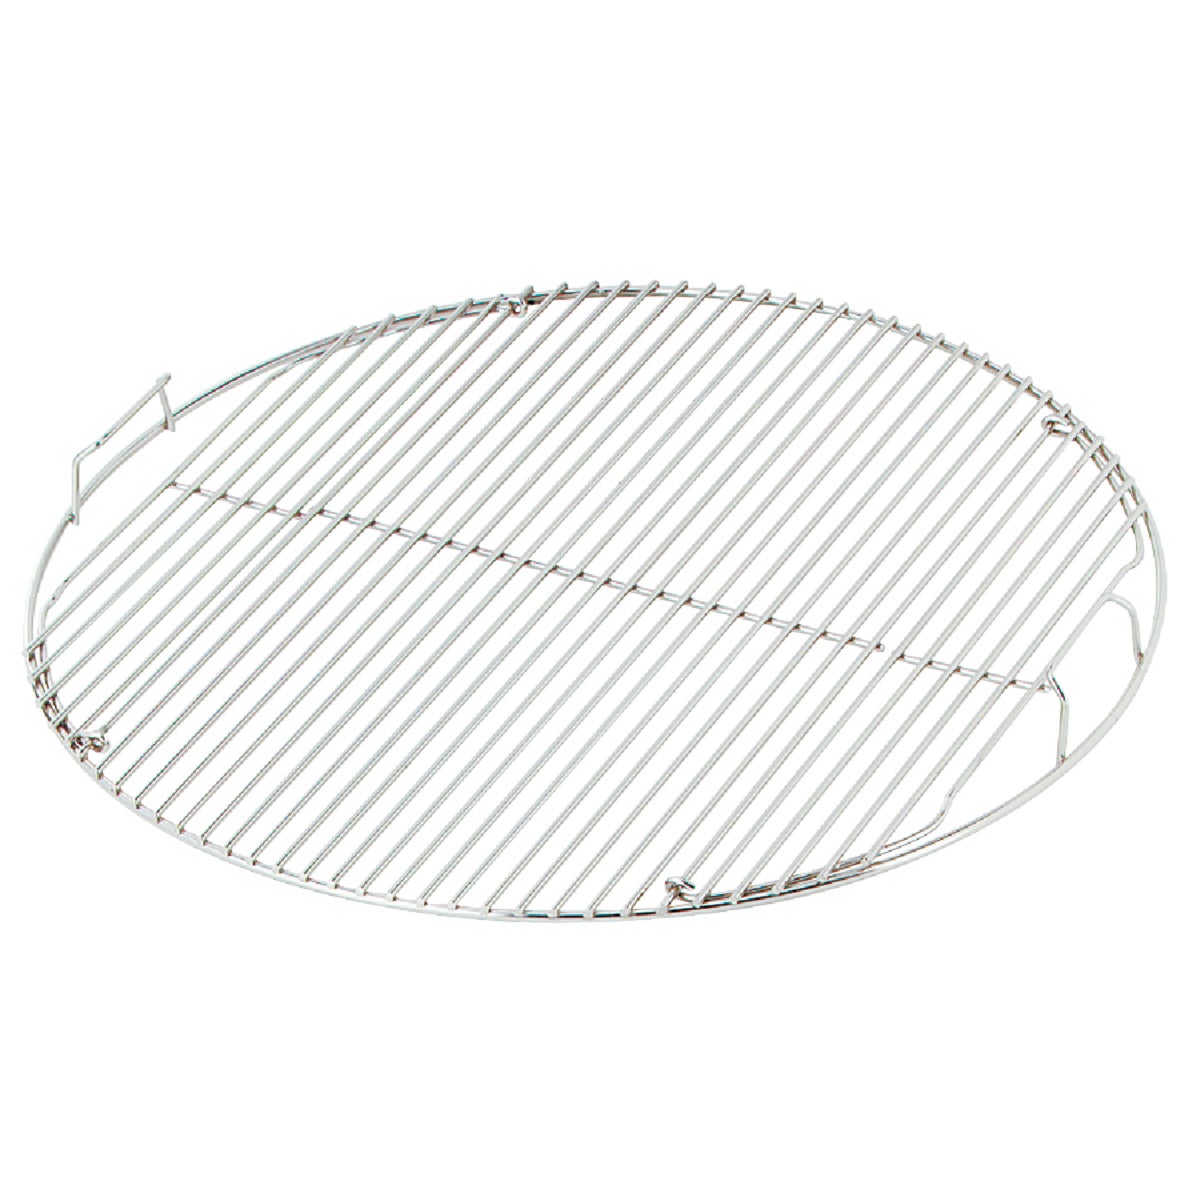 22.5″ HINGE GRILL GRATE